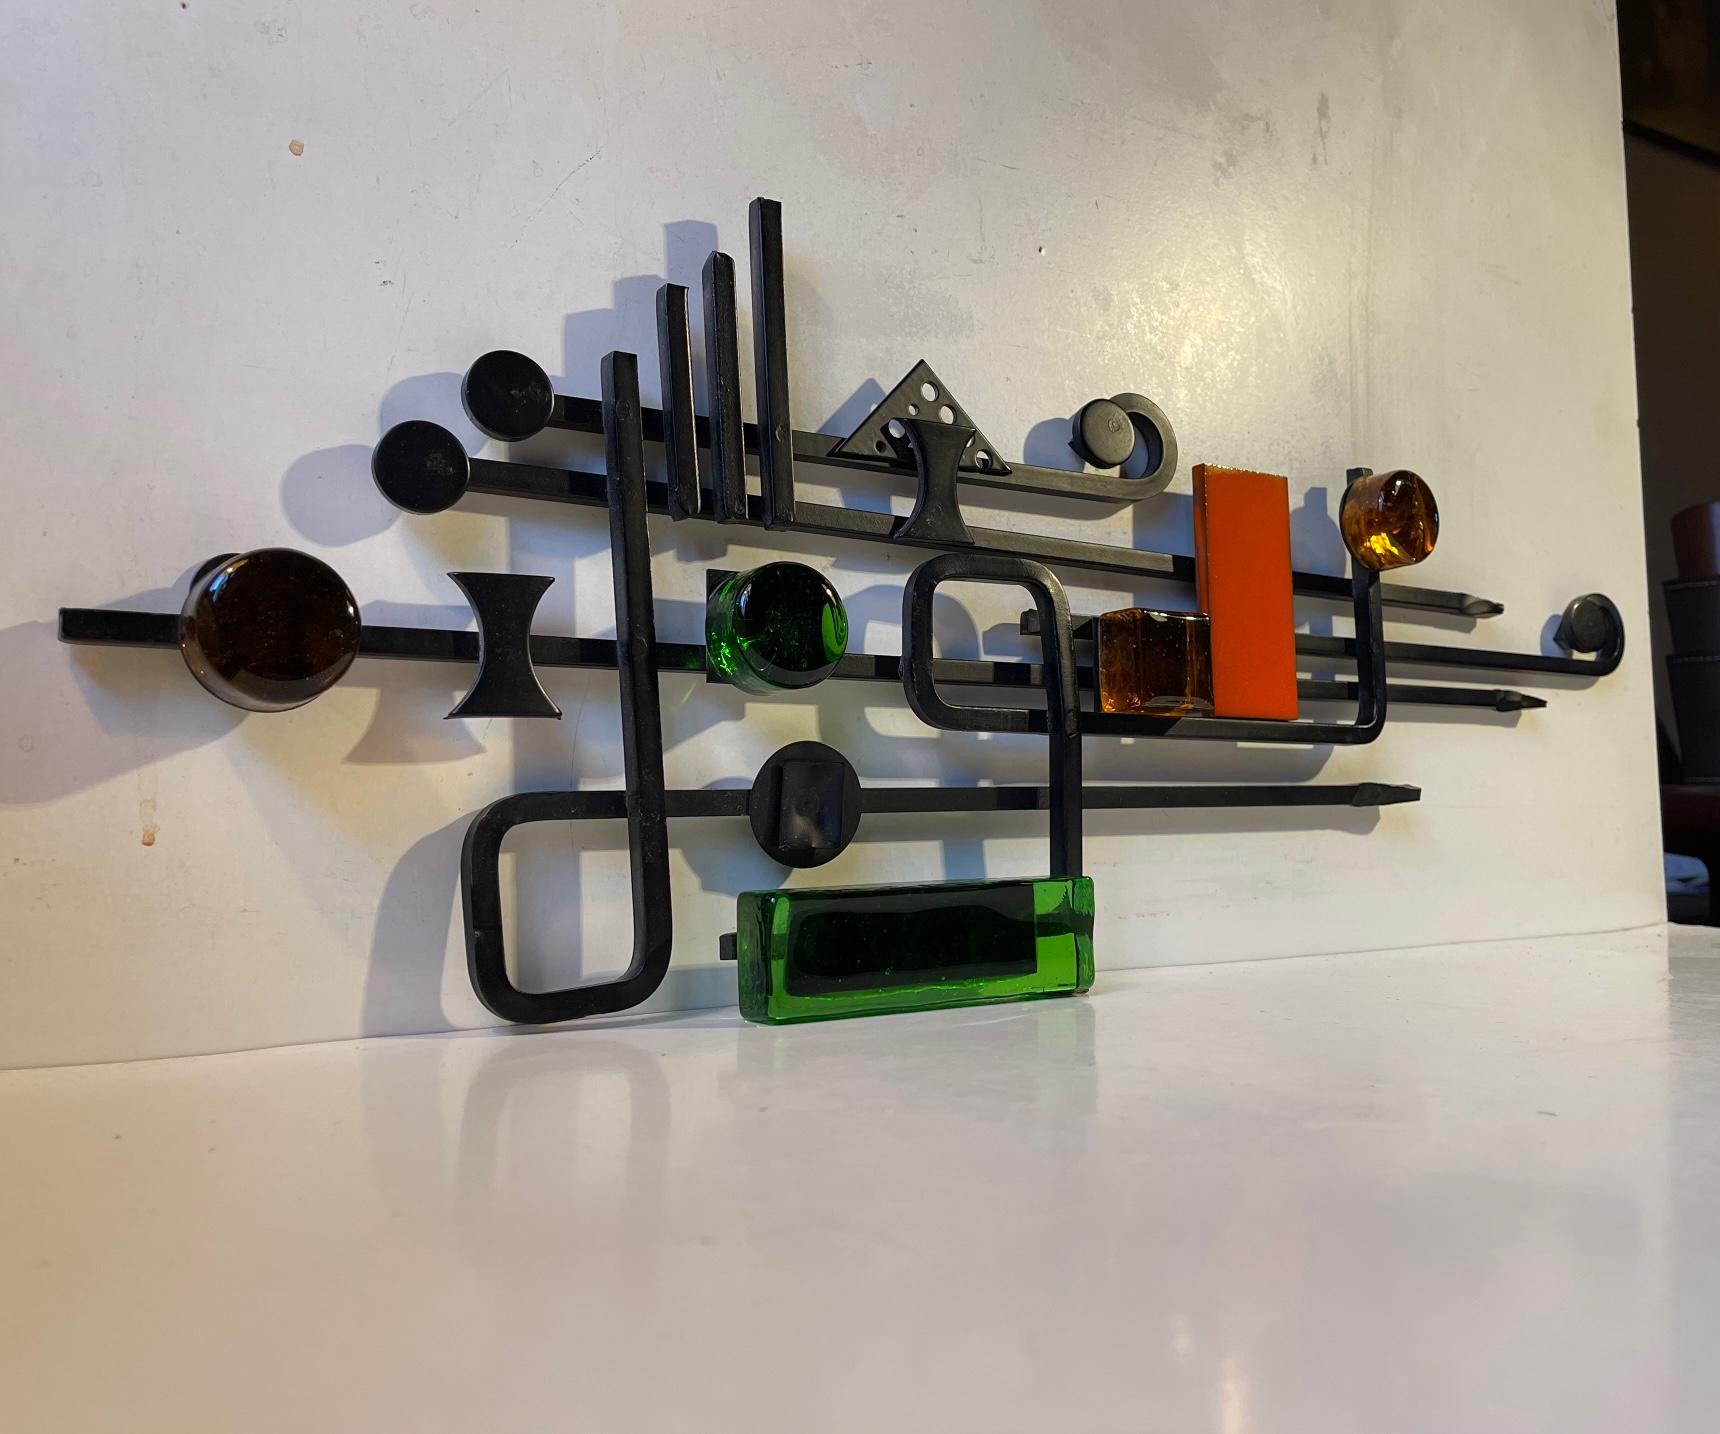 Joan Miro and Wassily Kandinsky inspired Wall sculpture made by Danish design company Dantoft kunstartikler (trans.: art objects). It is made from black lacquered and welded iron set in a graphic formation highlighted by thick green and amber yellow